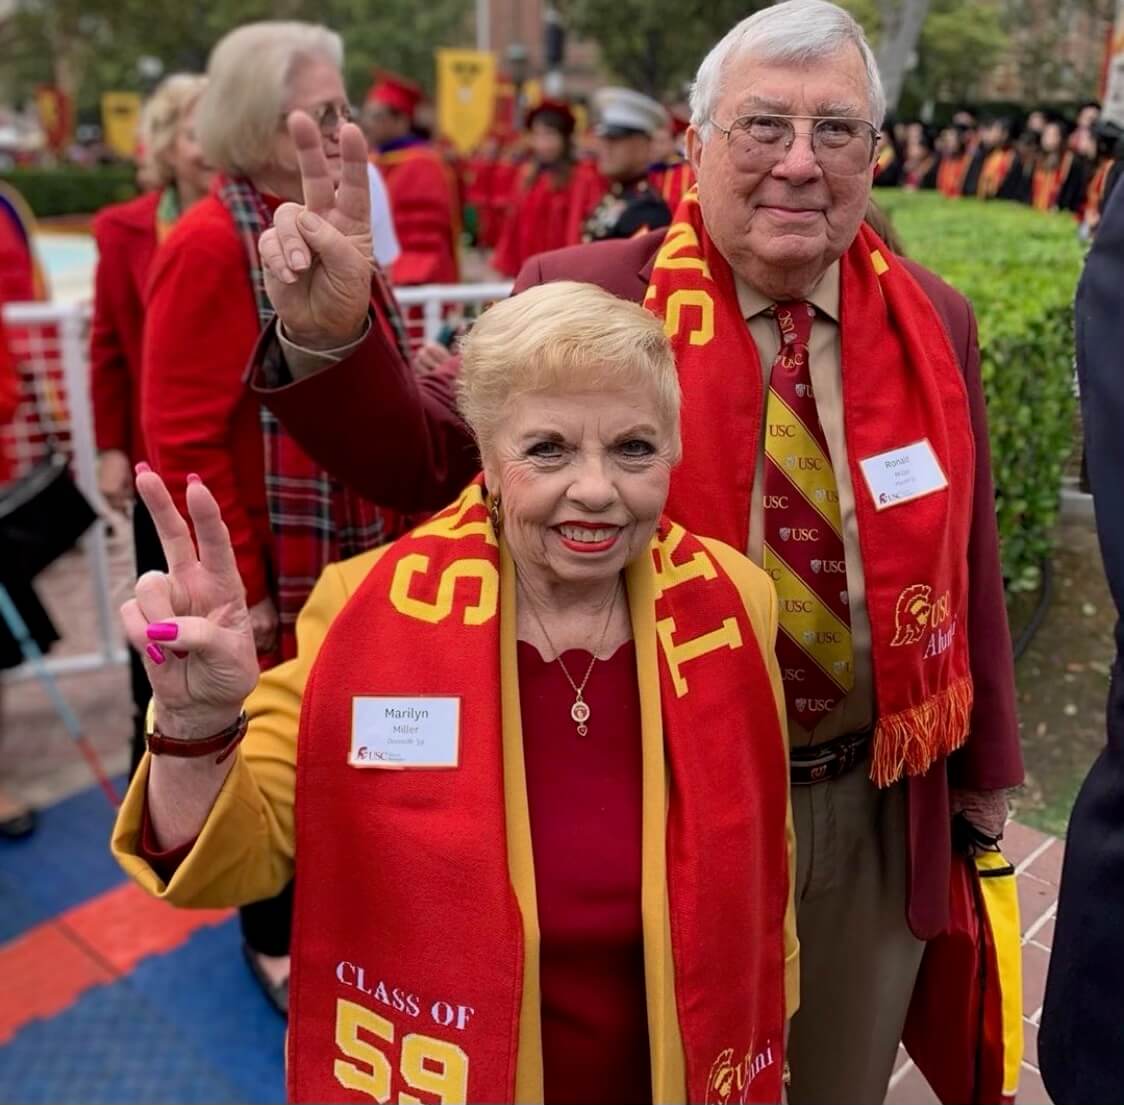 Marilyn and Ronald Miller - USC alumni - at a USC ceremony on campus making fight on symbol 